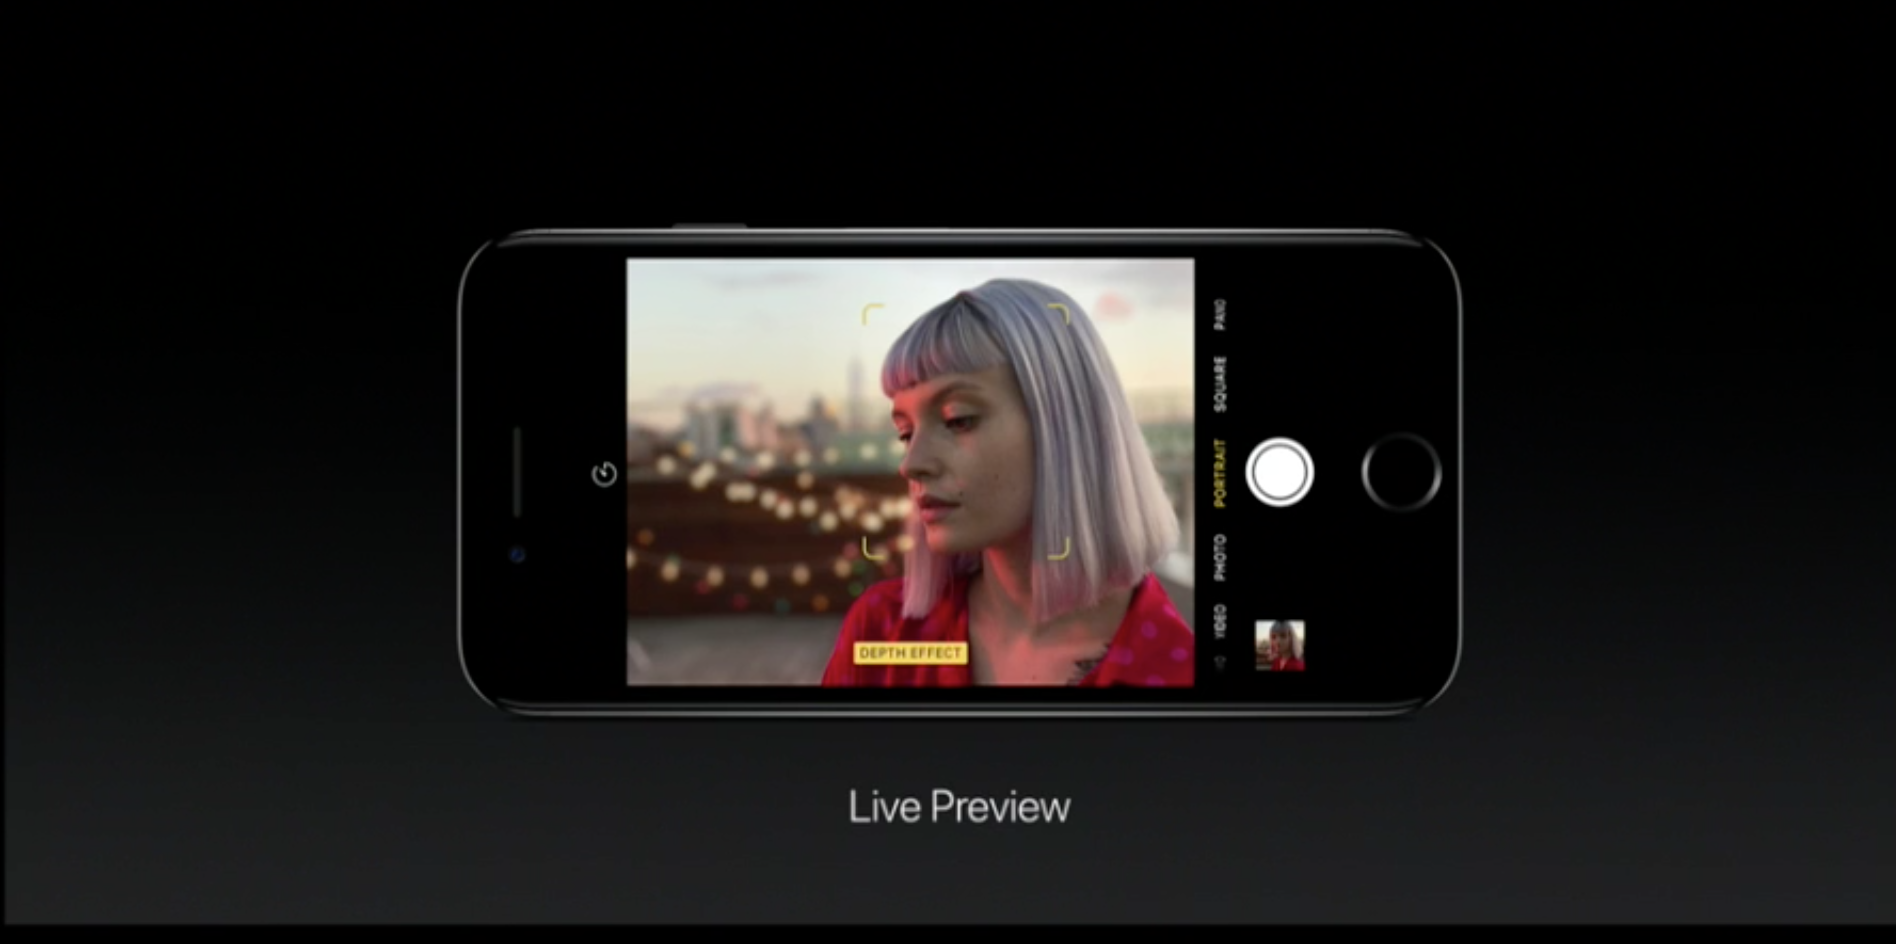 A Live Preview that's possible with the iPhone 7 Plus.